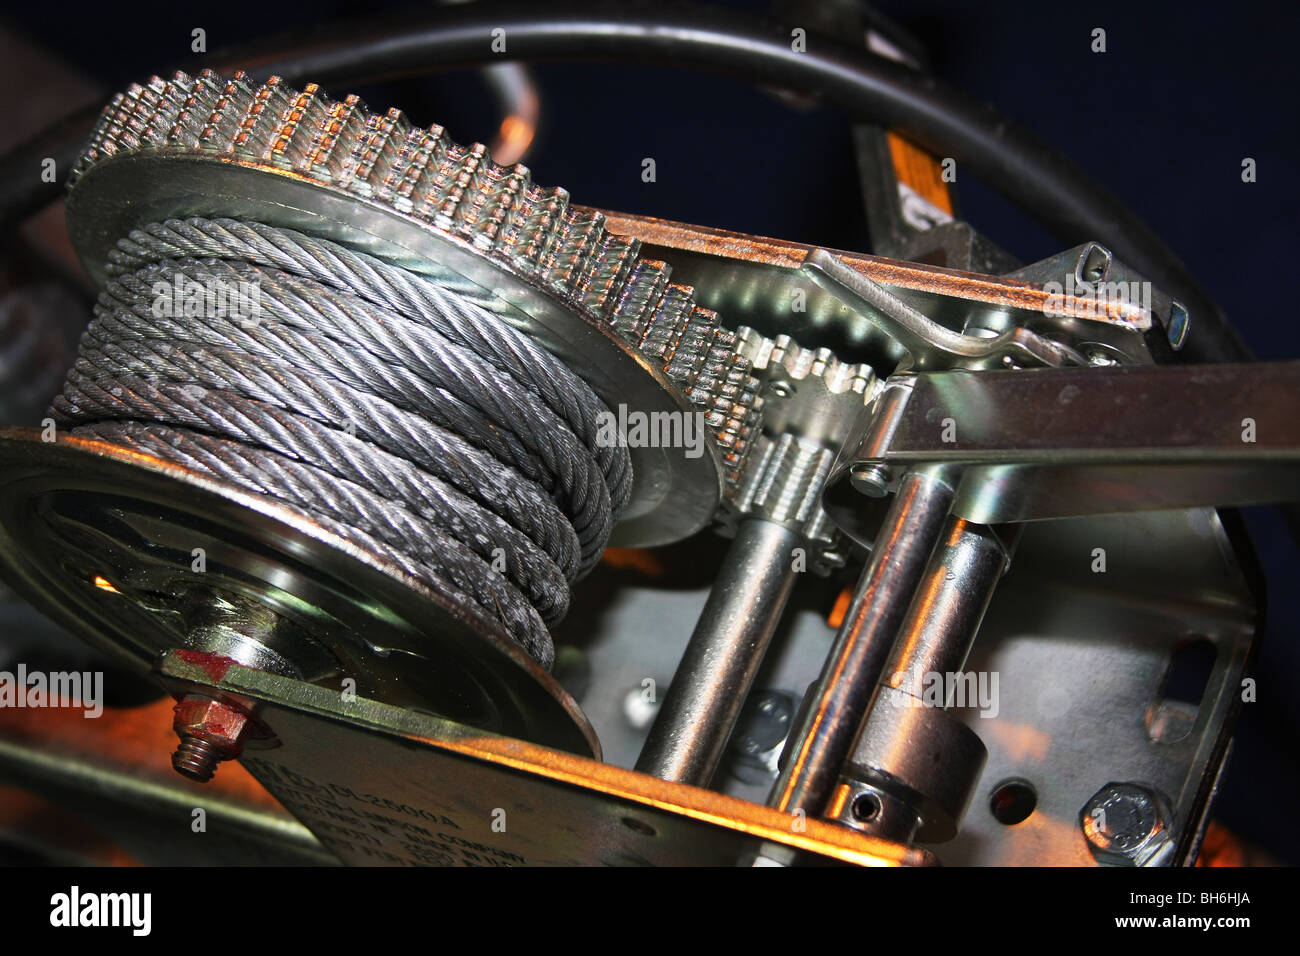 Close image of hand operated cable winch with gear and locking system. Stock Photo